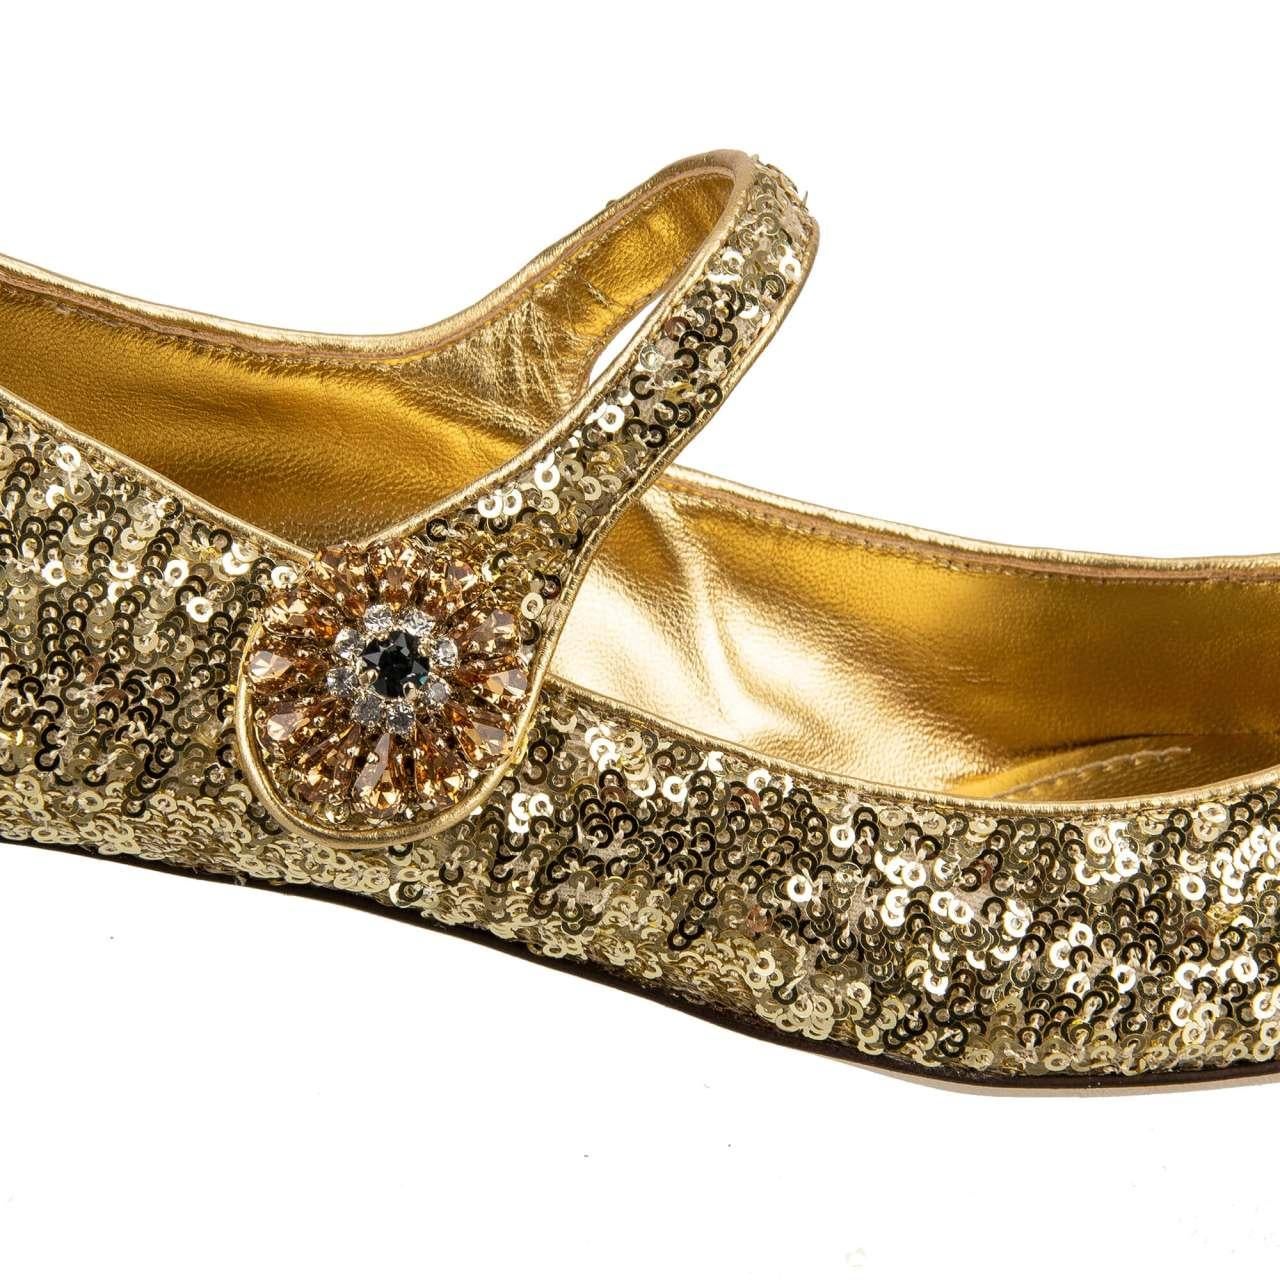 Dolce & Gabbana - Sequin Crystal Heels Mary Jane Pumps VALLY Gold 40 US 10 For Sale 2